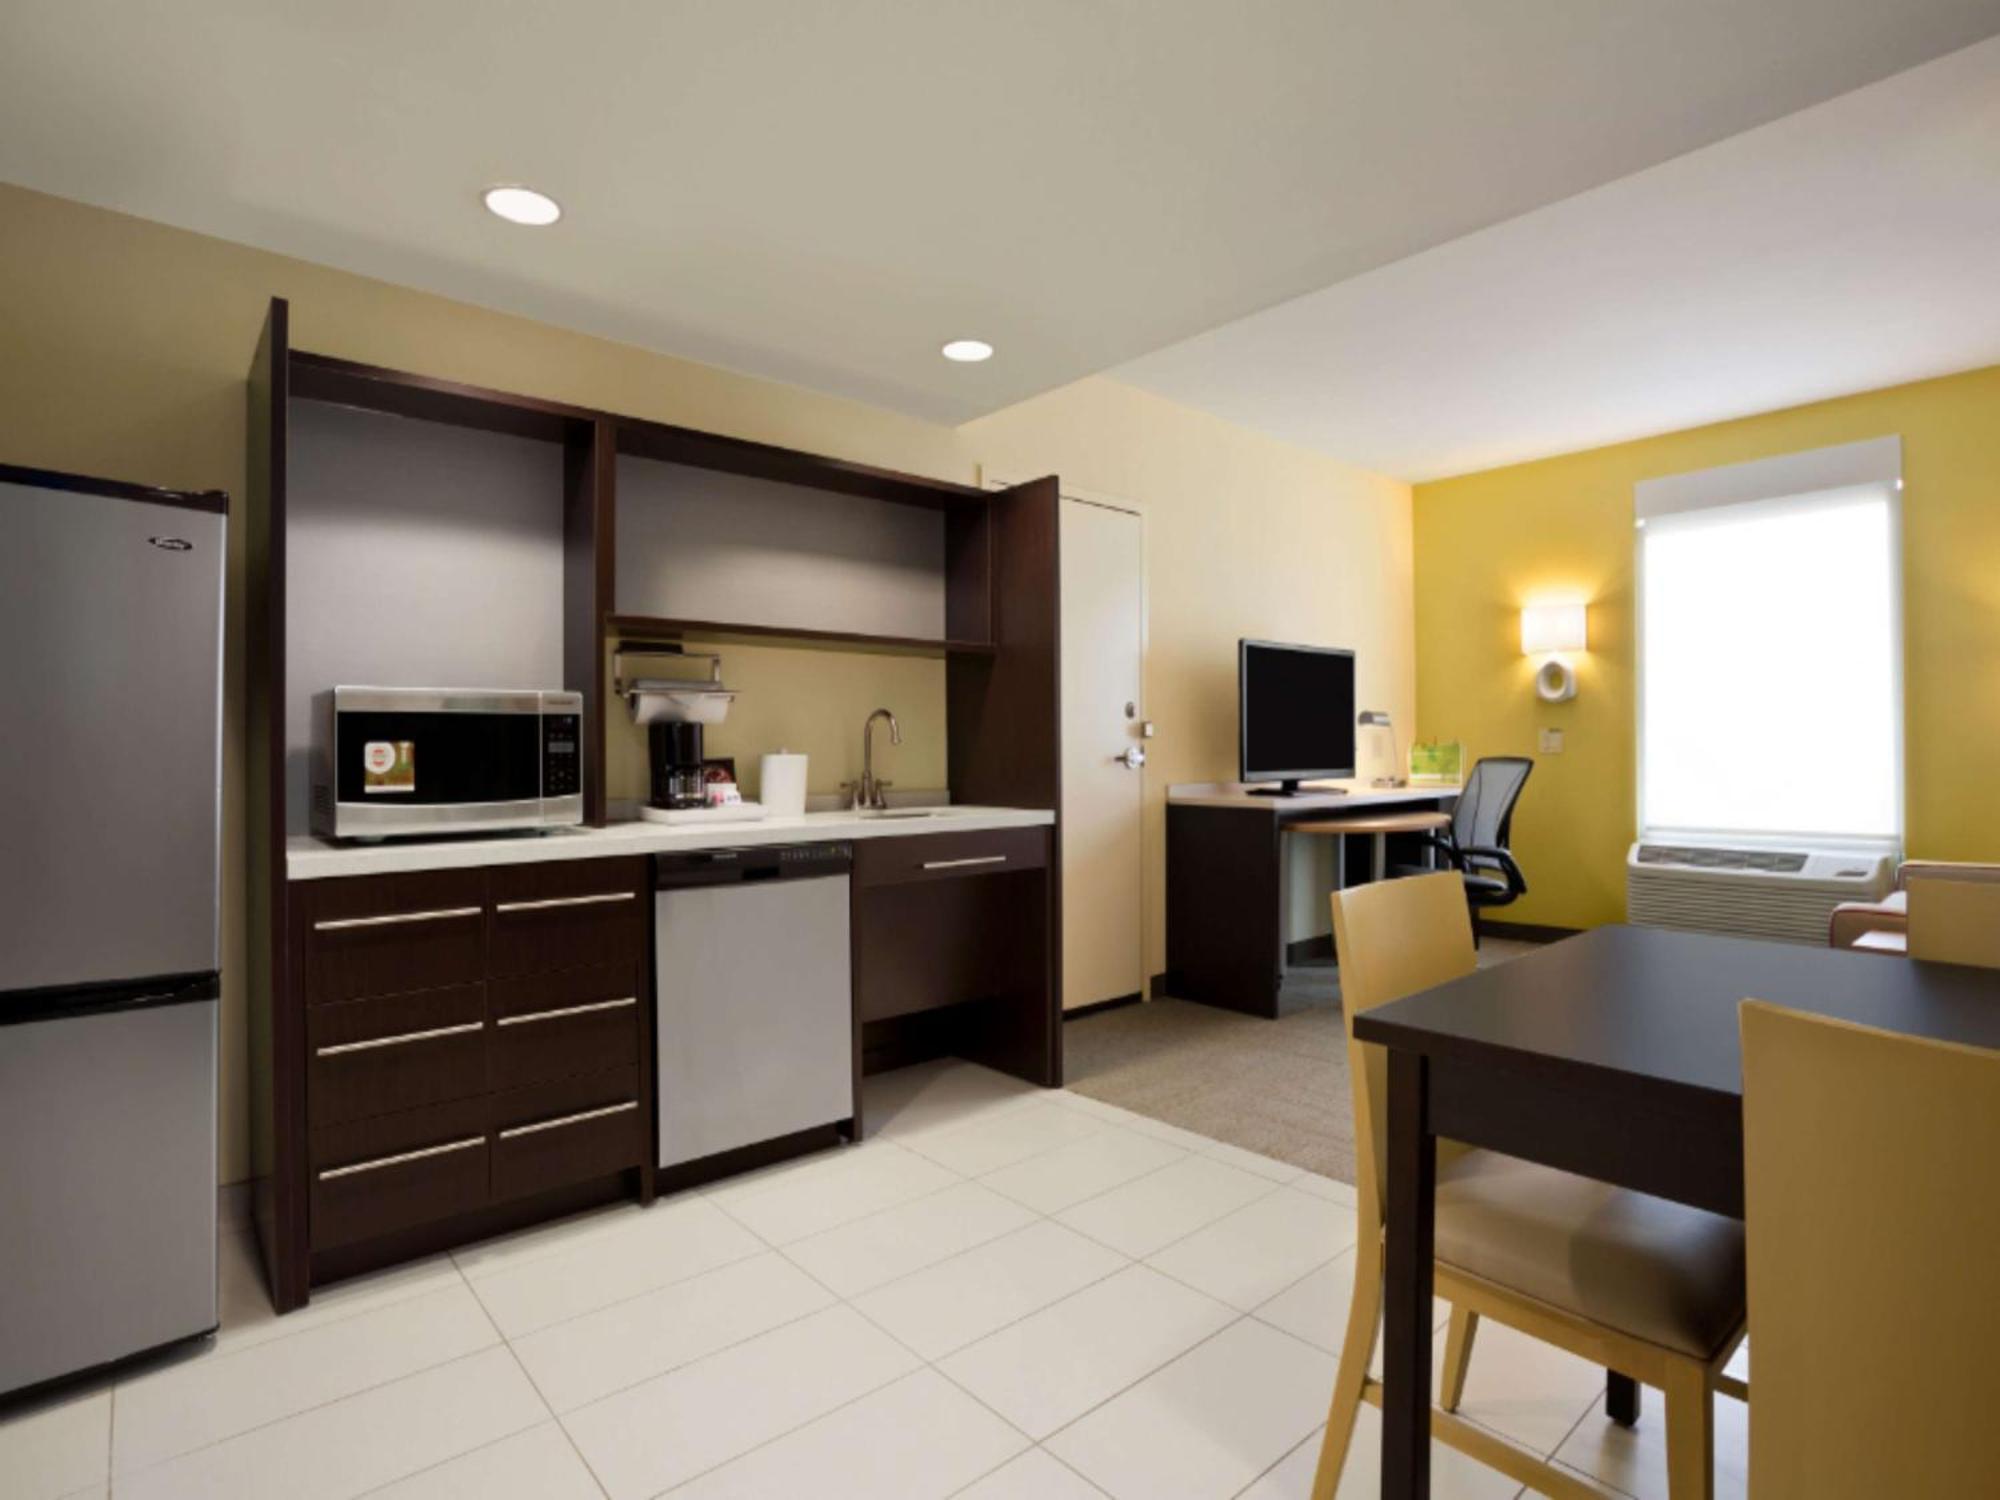 Home2 Suites By Hilton Greensboro Airport, Nc Экстерьер фото